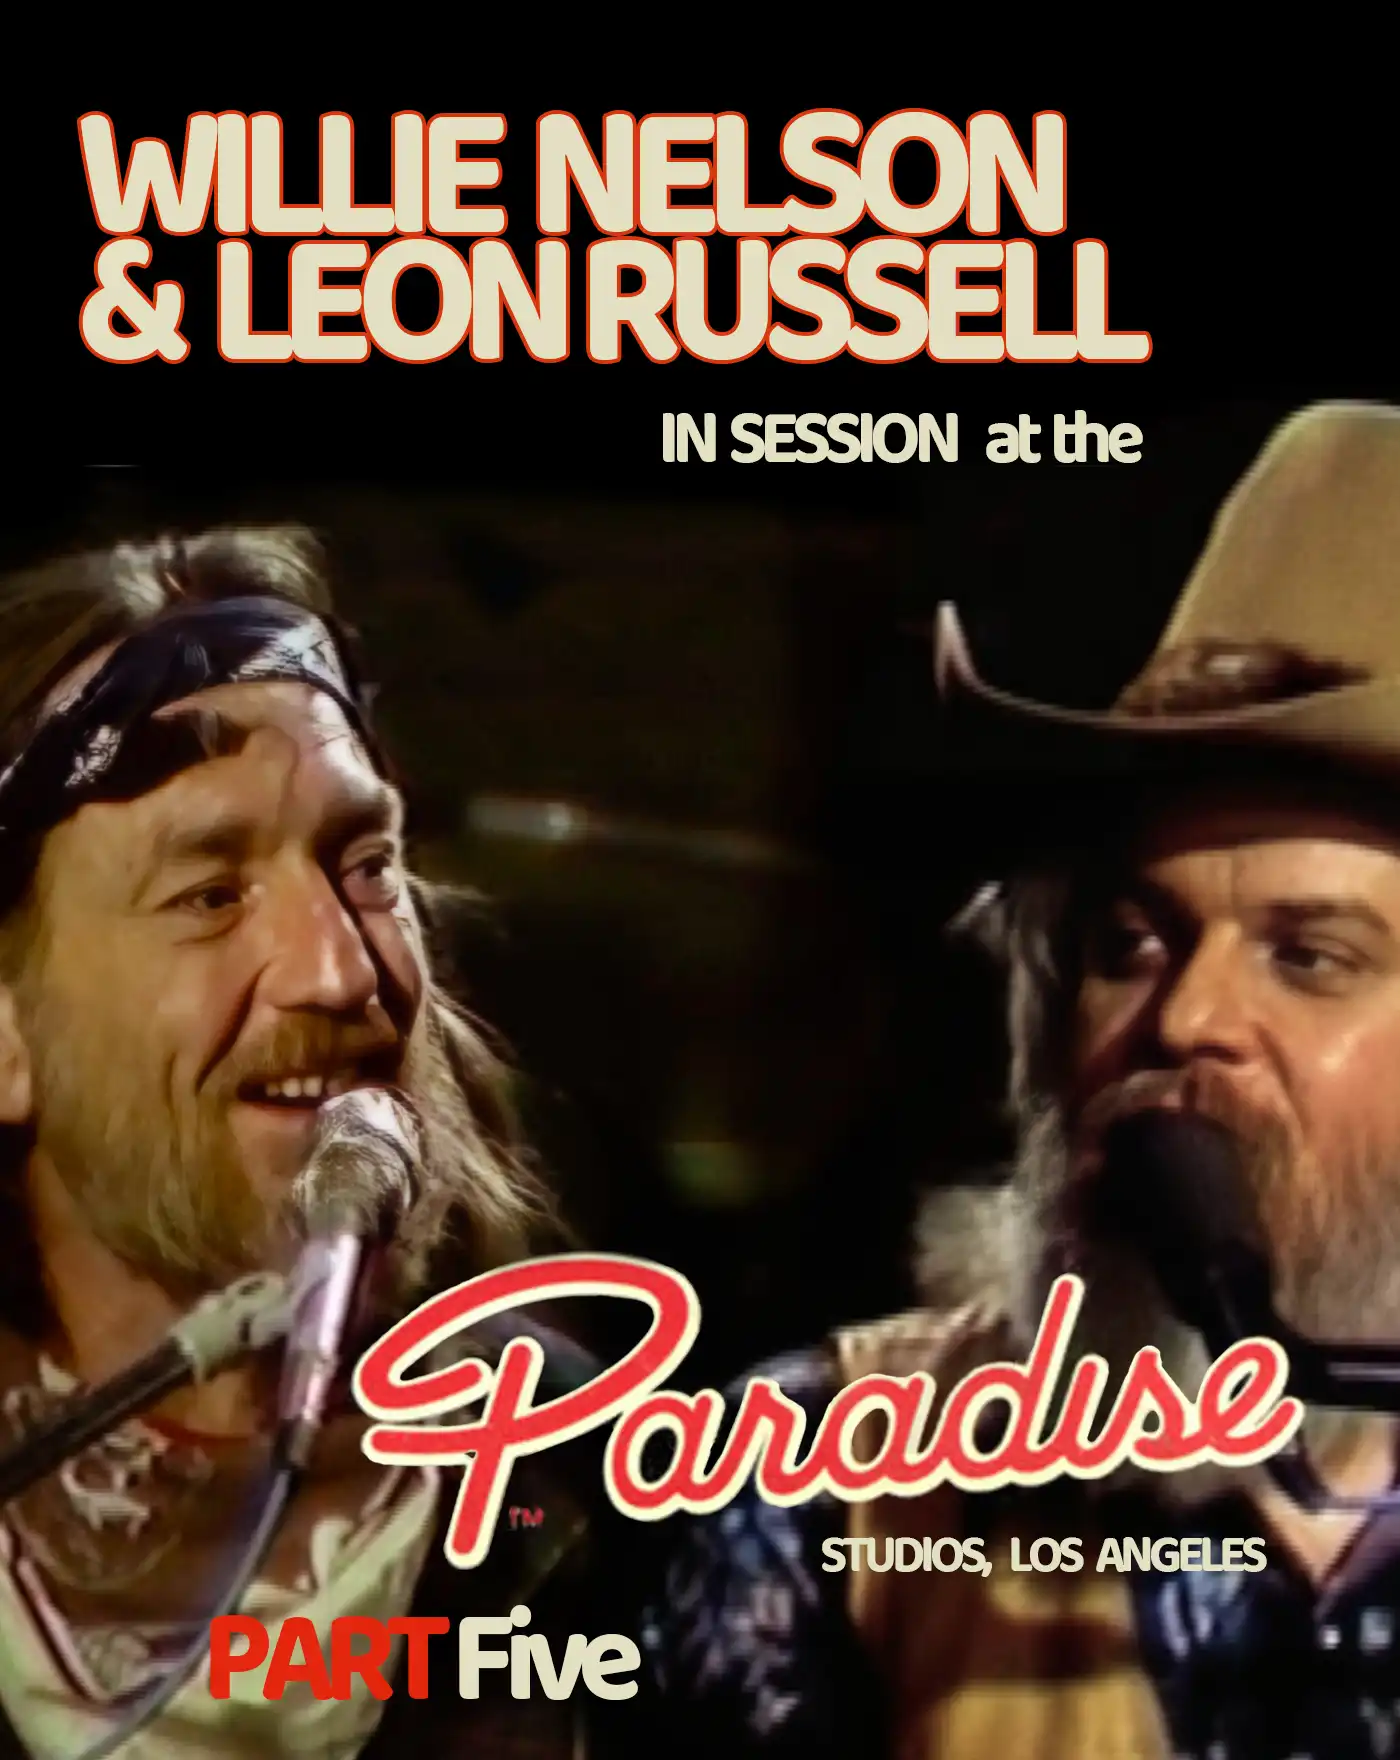 Leon Russell & Willie Nelson Part Five